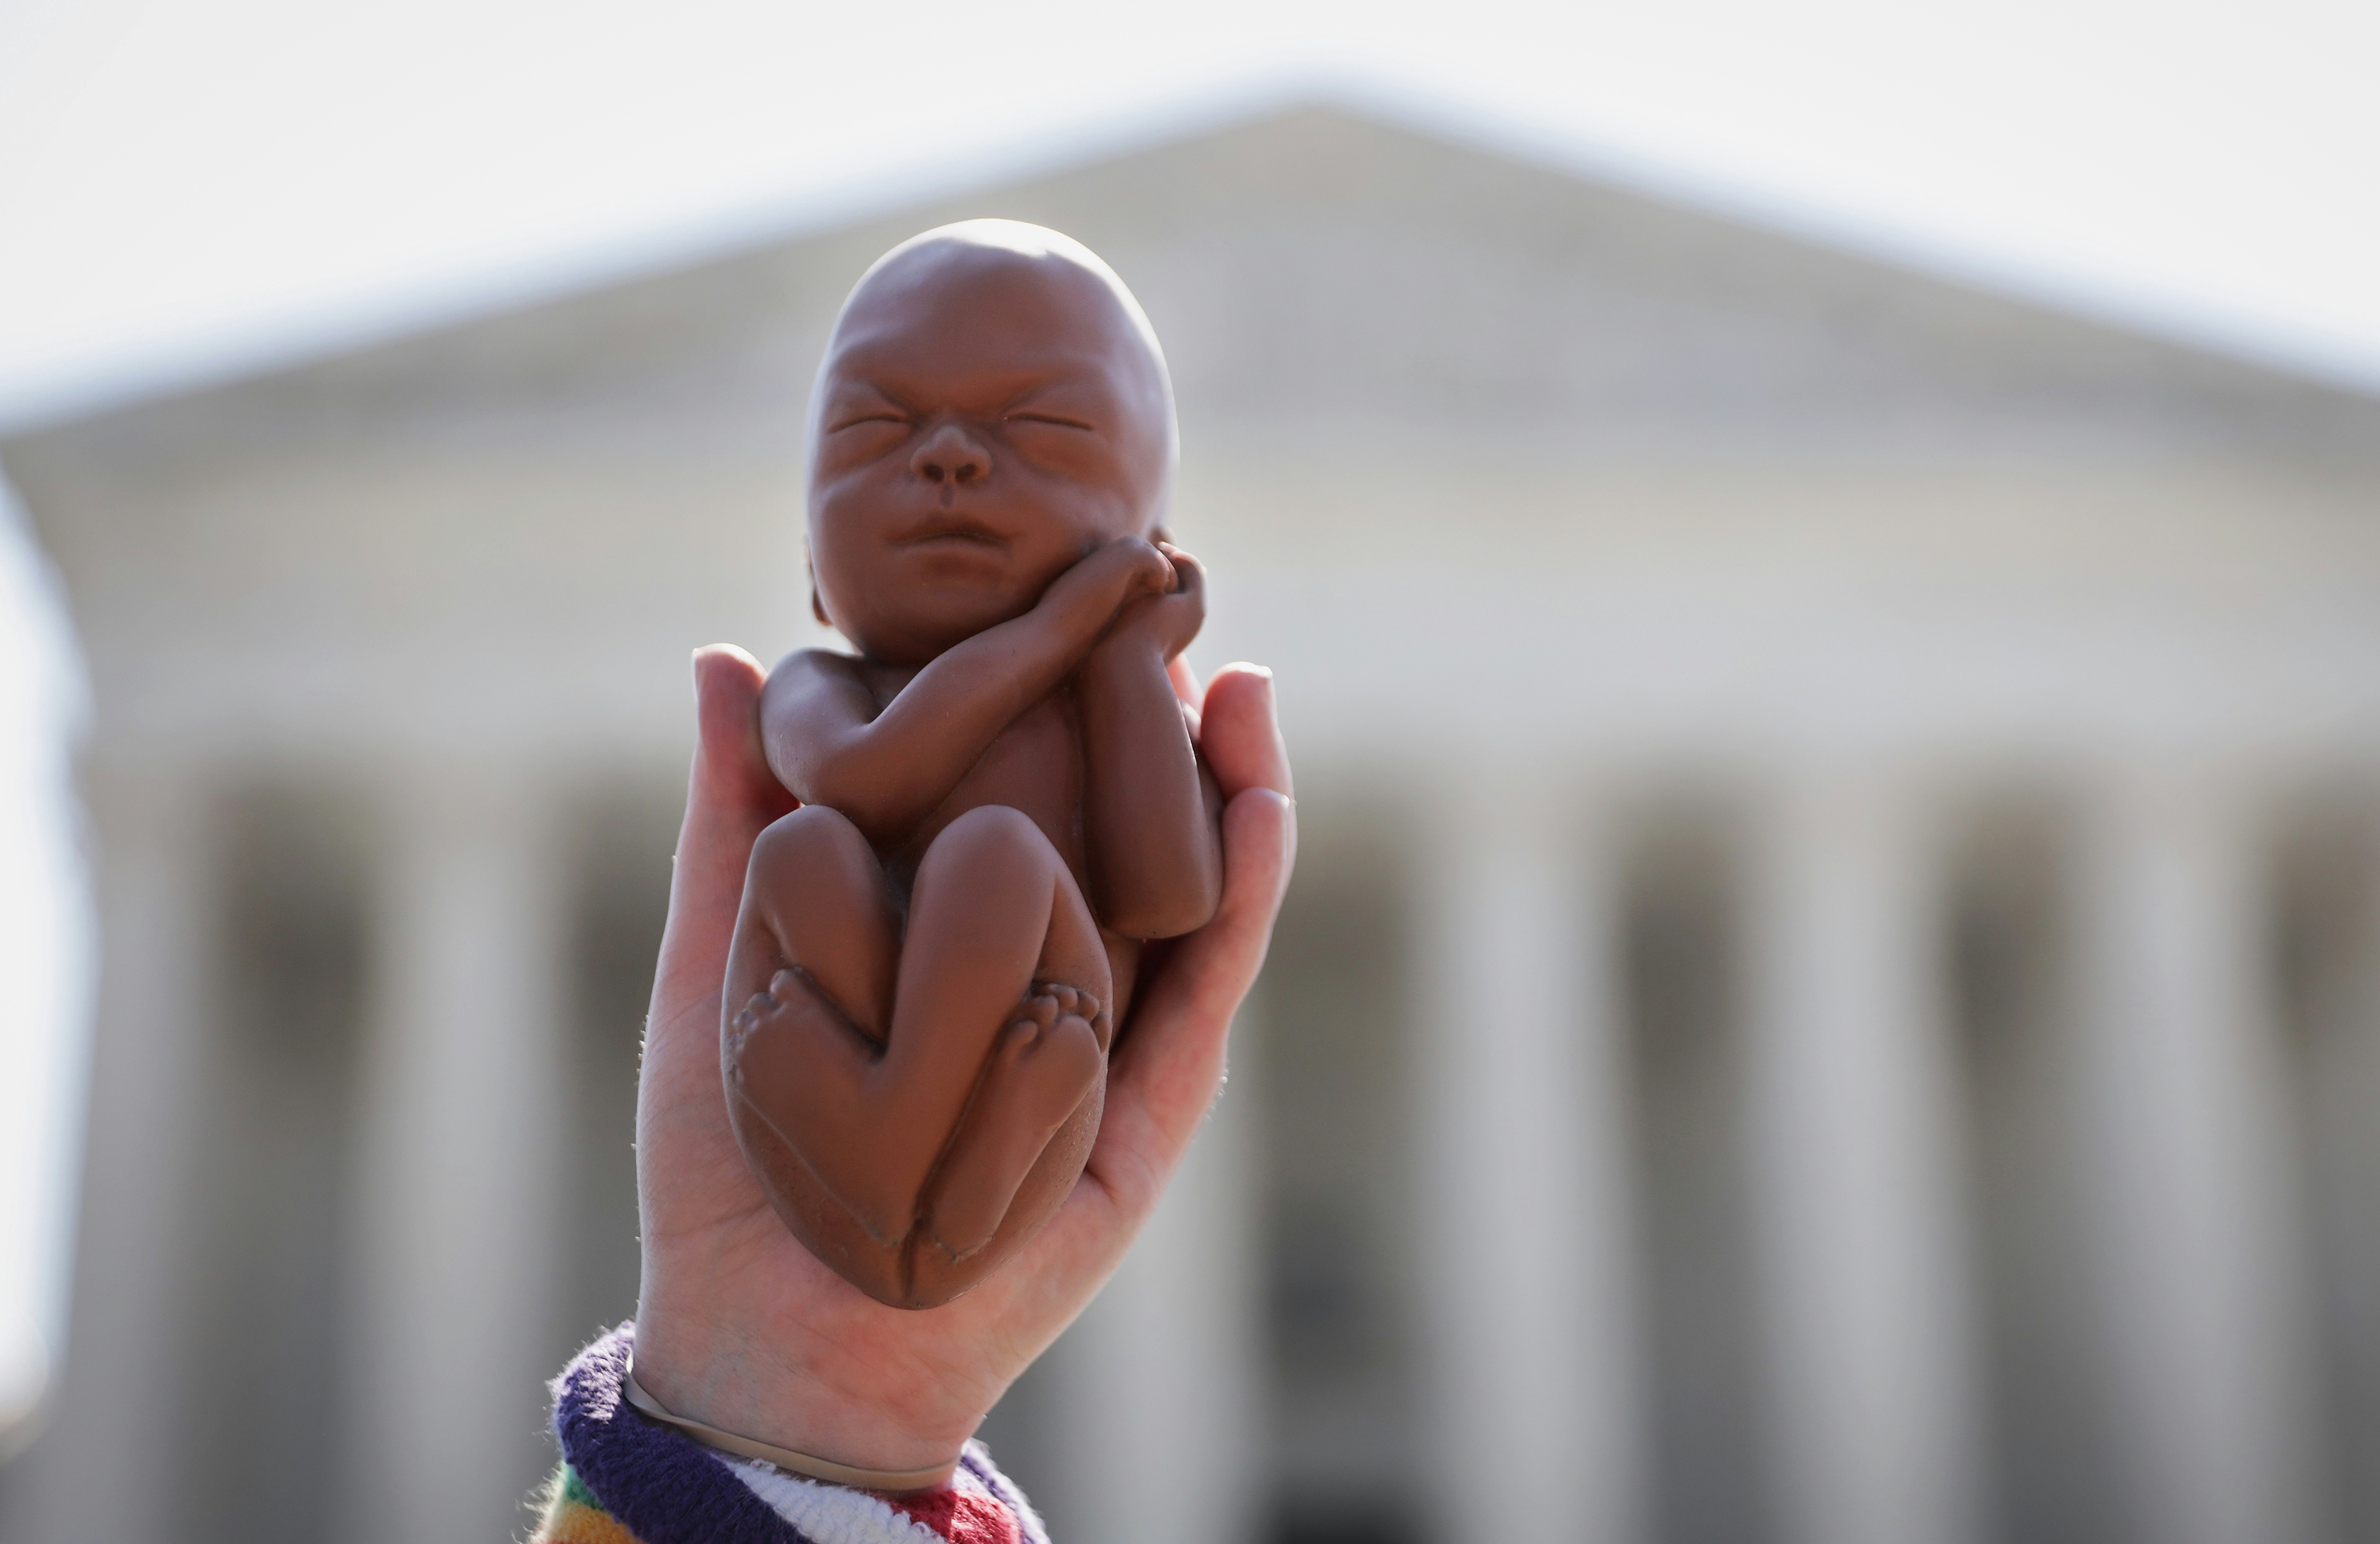 WASHINGTON, DC - JUNE 22:  A pro-life activist holds up a model of a fetus during a protest in front of the U.S. Supreme Court June 22, 2020 in Washington, DC. The Supreme Court is expected to issue a ruling on abortion rights soon. (Photo by Alex Wong/Getty Images)